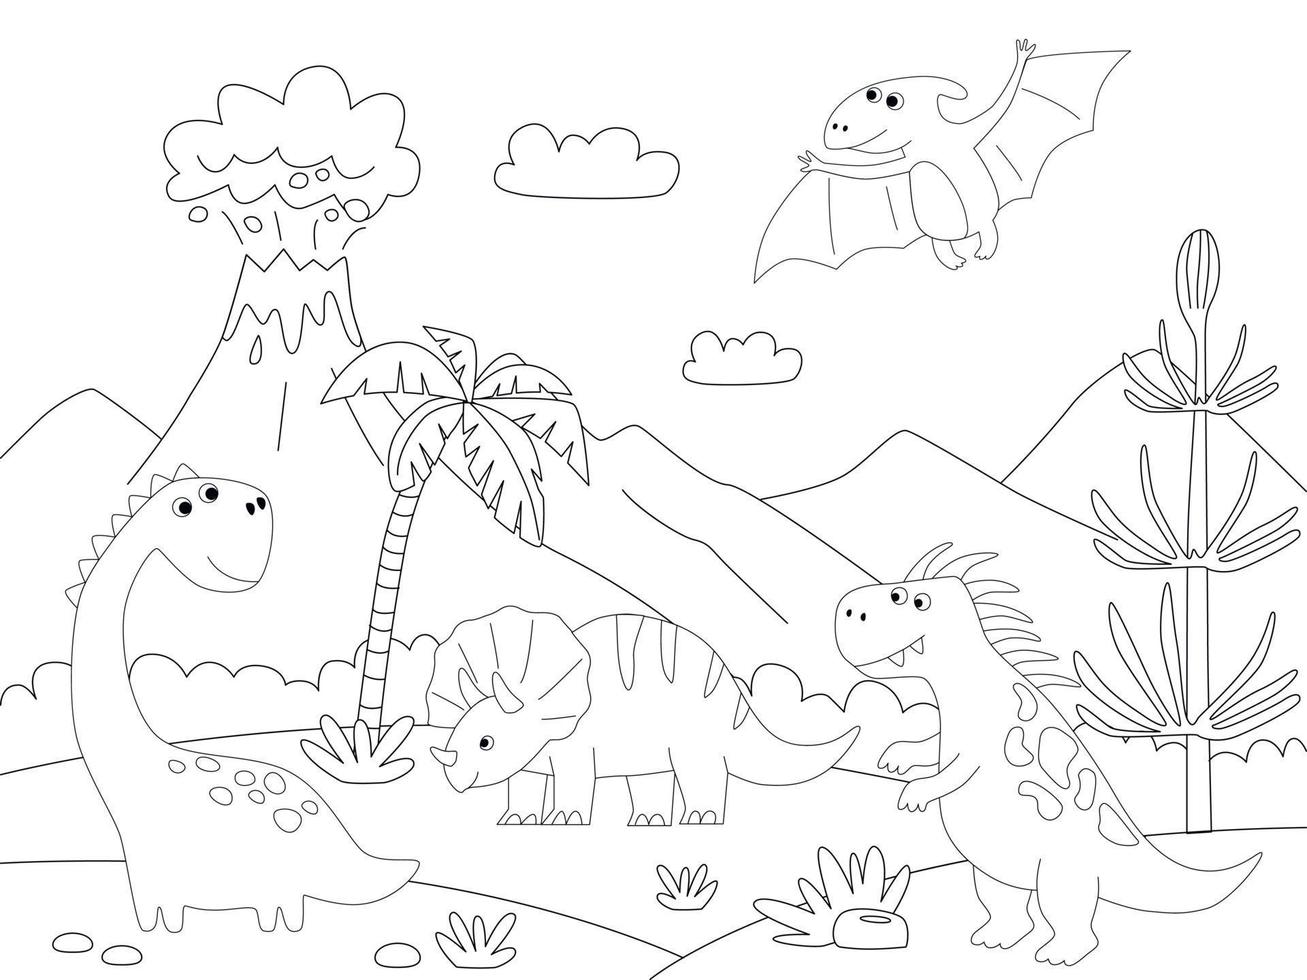 A dinosaur cartoon cute animal background prehistoric landscape coloring outline scene. Vector printable coloring page for children in cartoon style